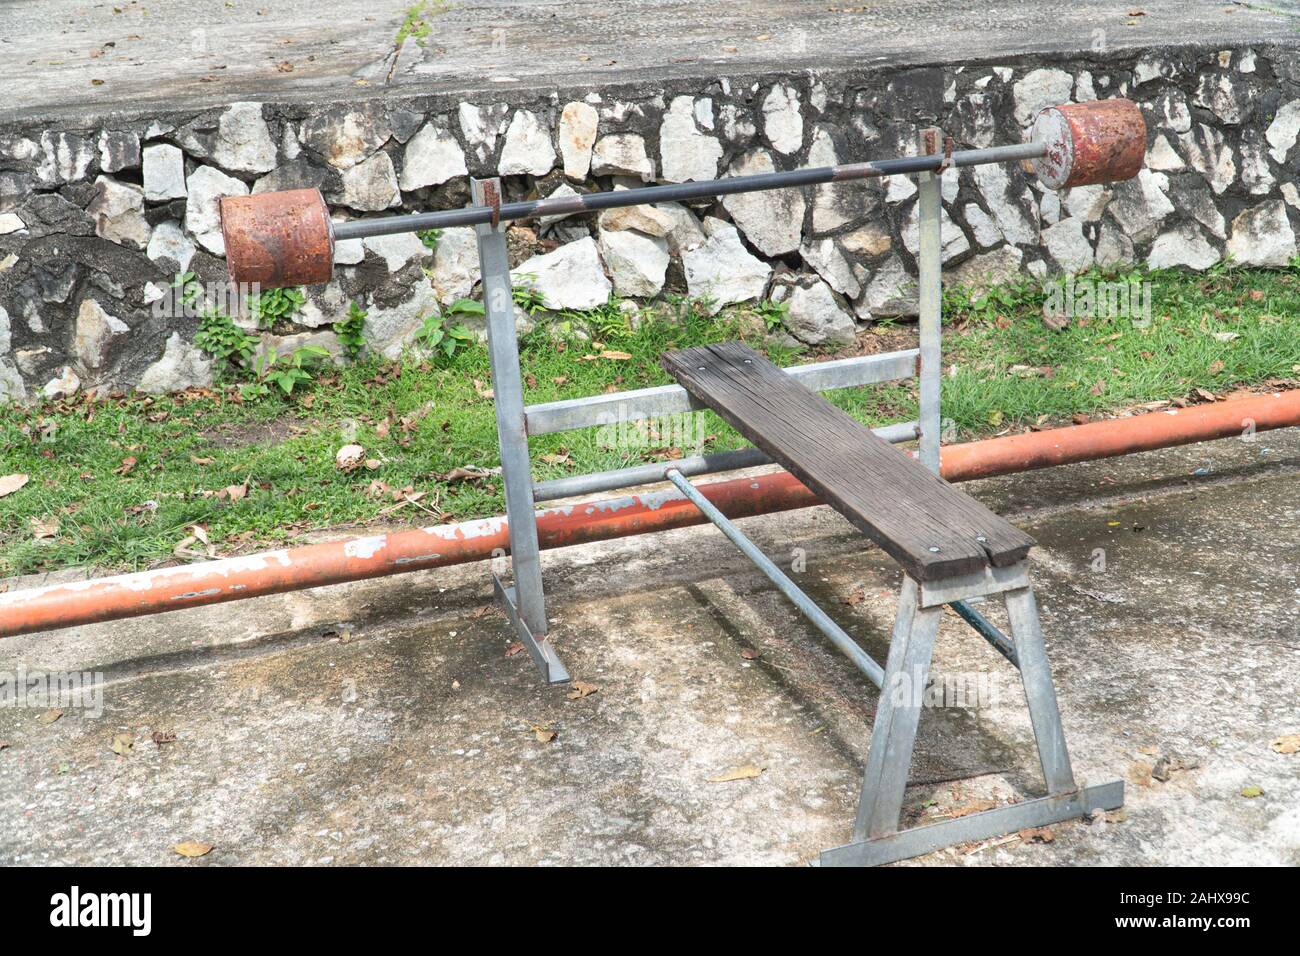 homemade barbell Street workout. Exercise equipment used in weight training  Stock Photo - Alamy